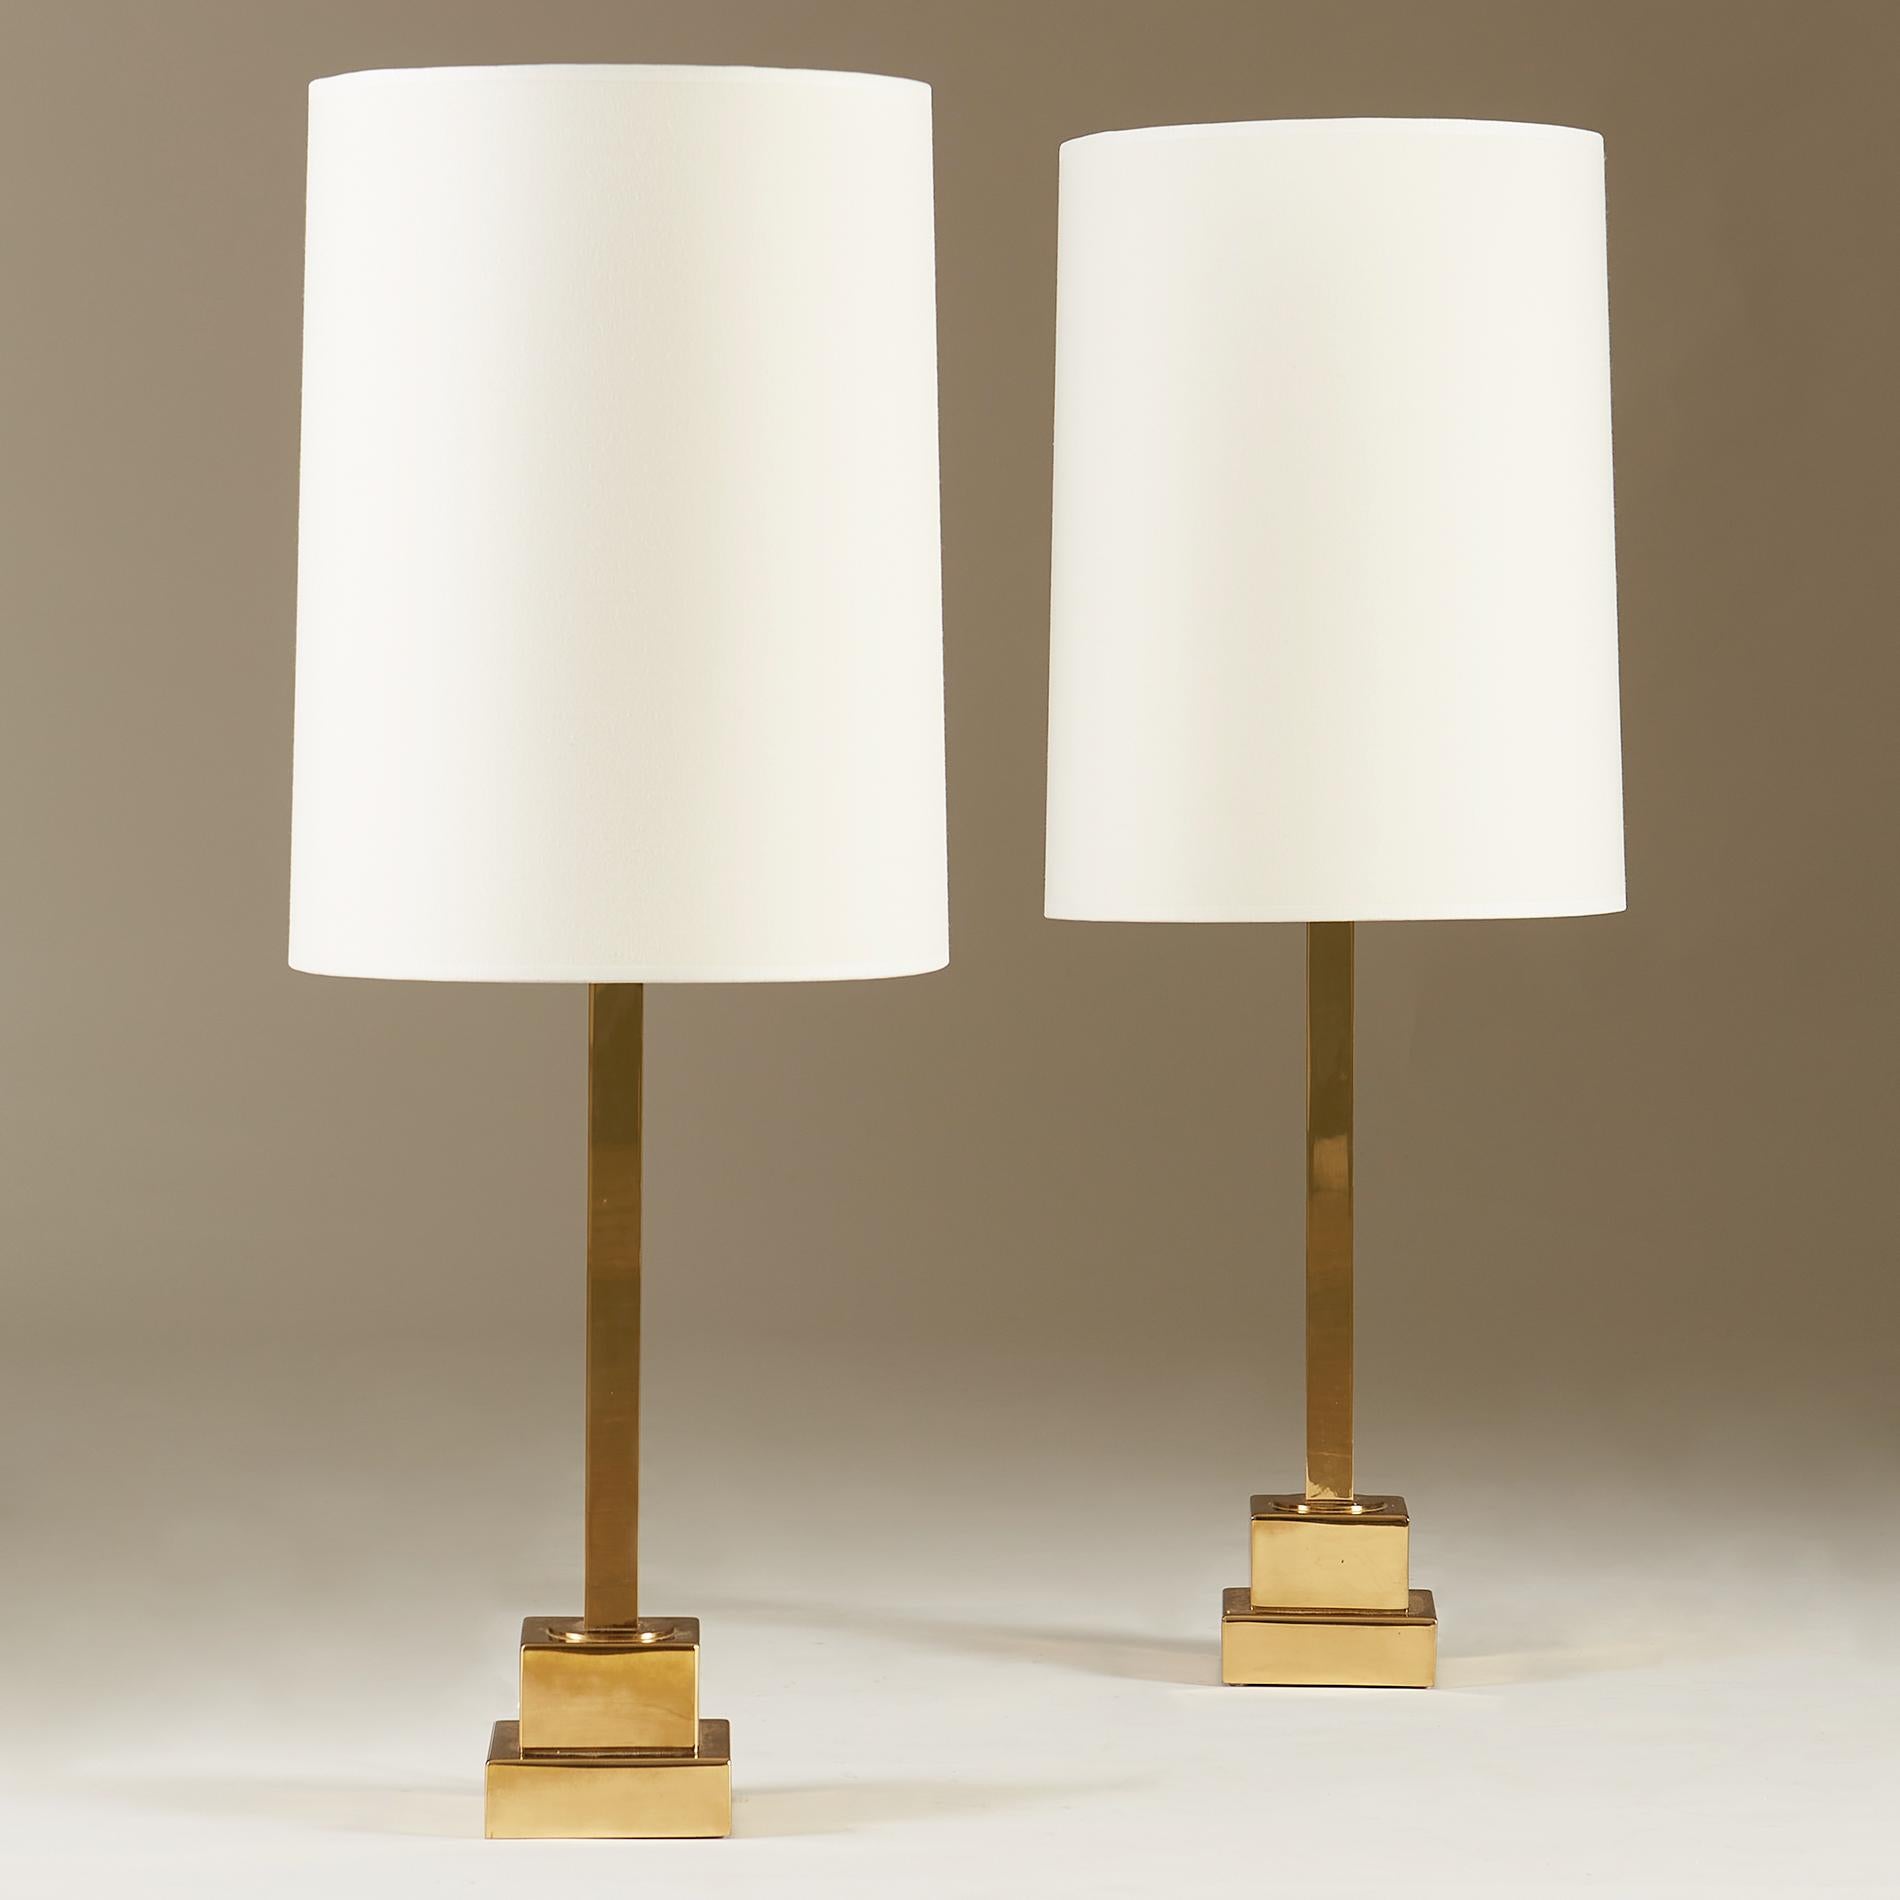 Chic pair of 1960's Bergbom table lamps. Tall brass stem sits on 2-tiered square base. Heavy and imposing. Large cream linen shades compliment the proportions.